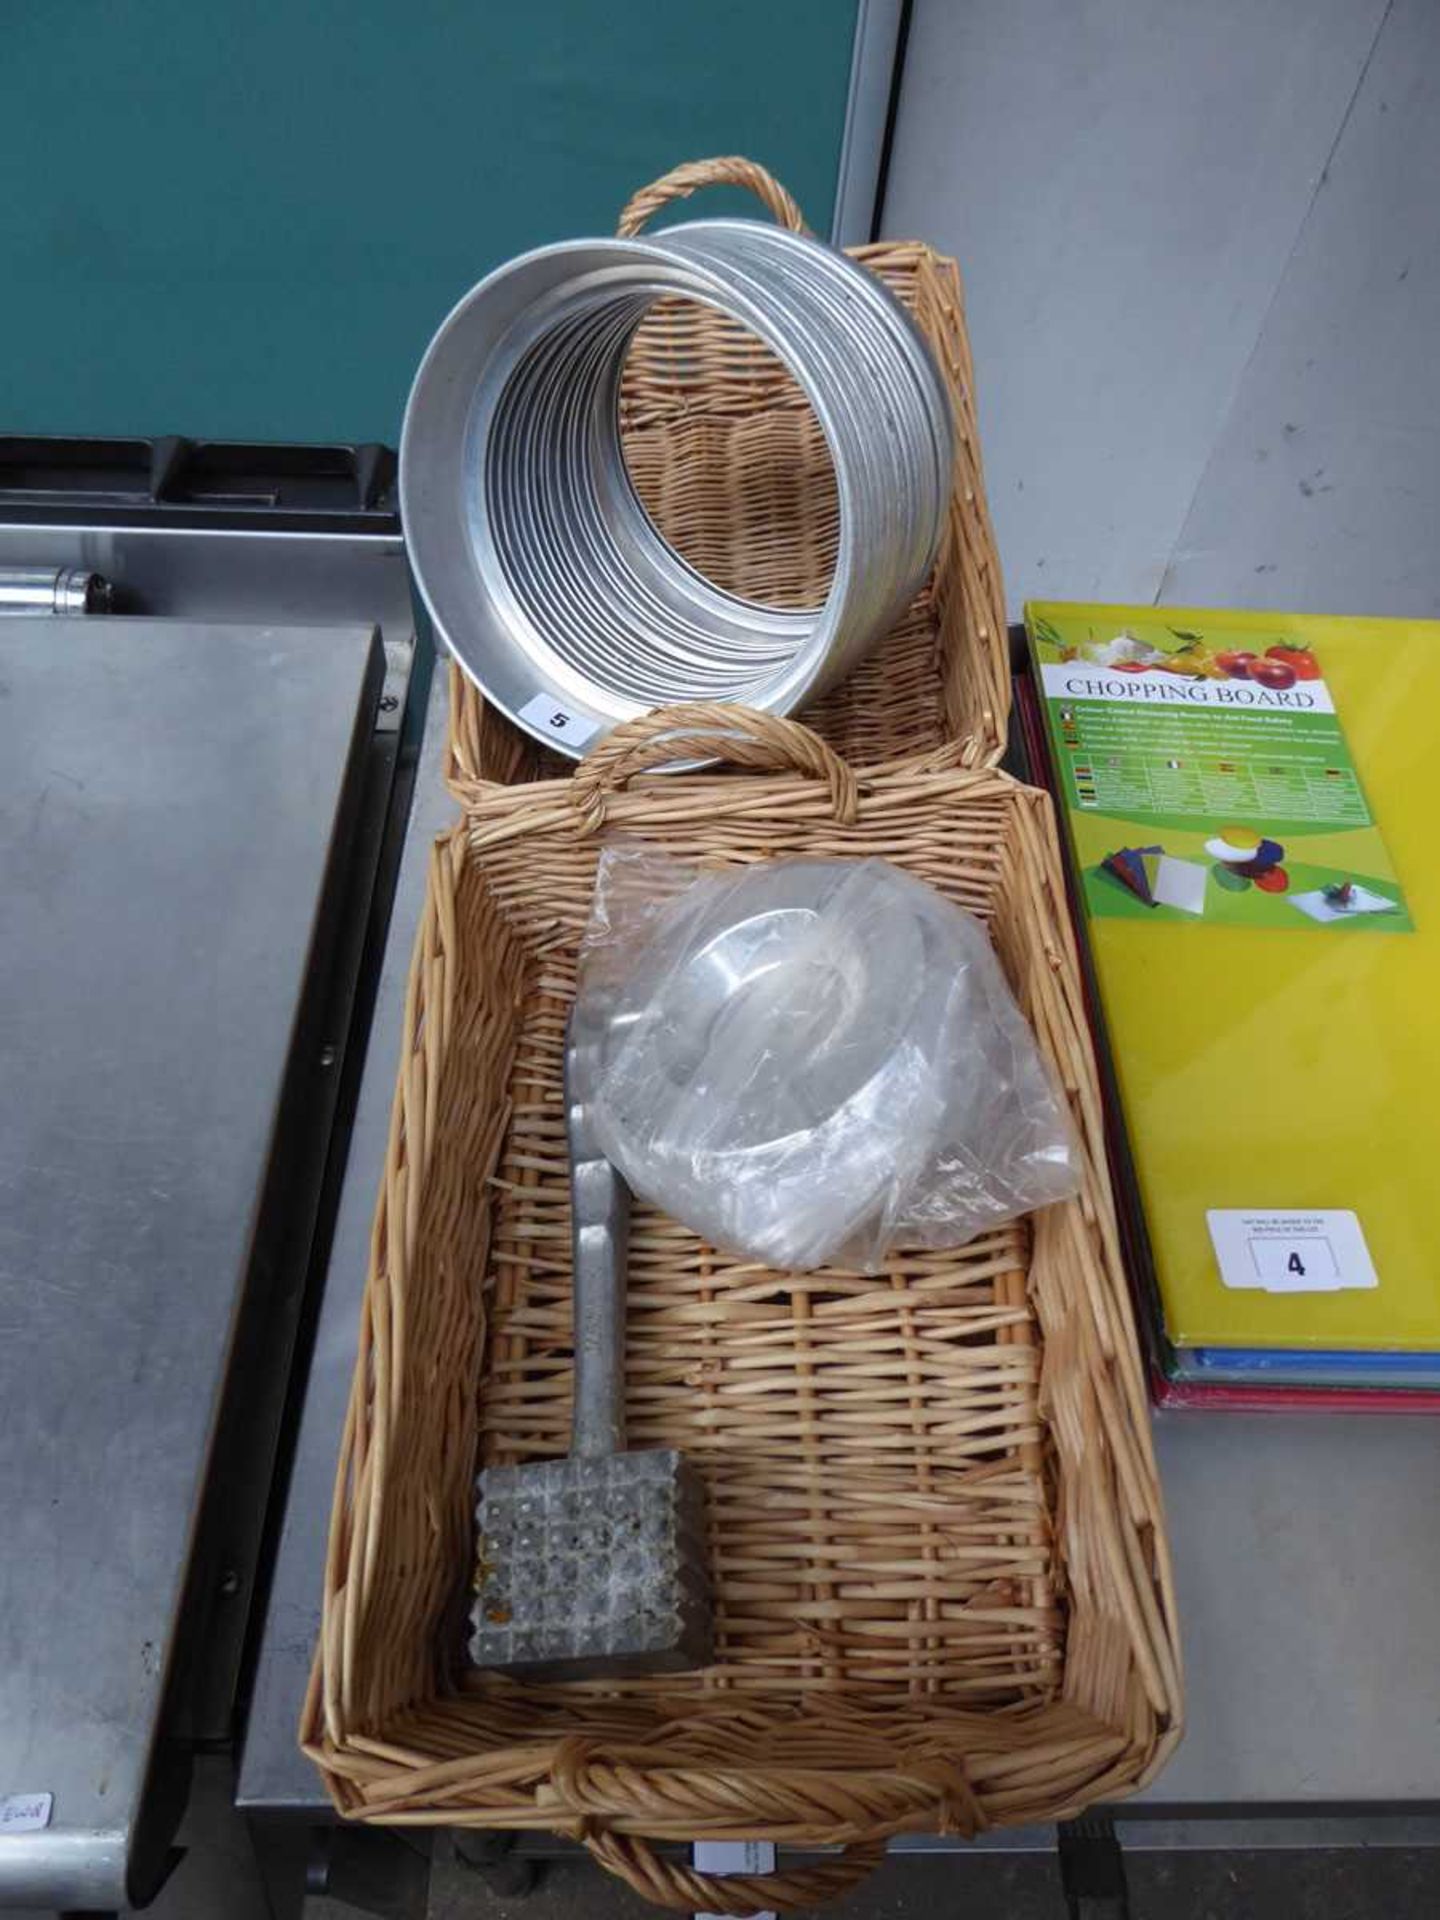 4 wicker baskets plus a stack of aluminium plate rings, a meat tenderiser and some ashtrays